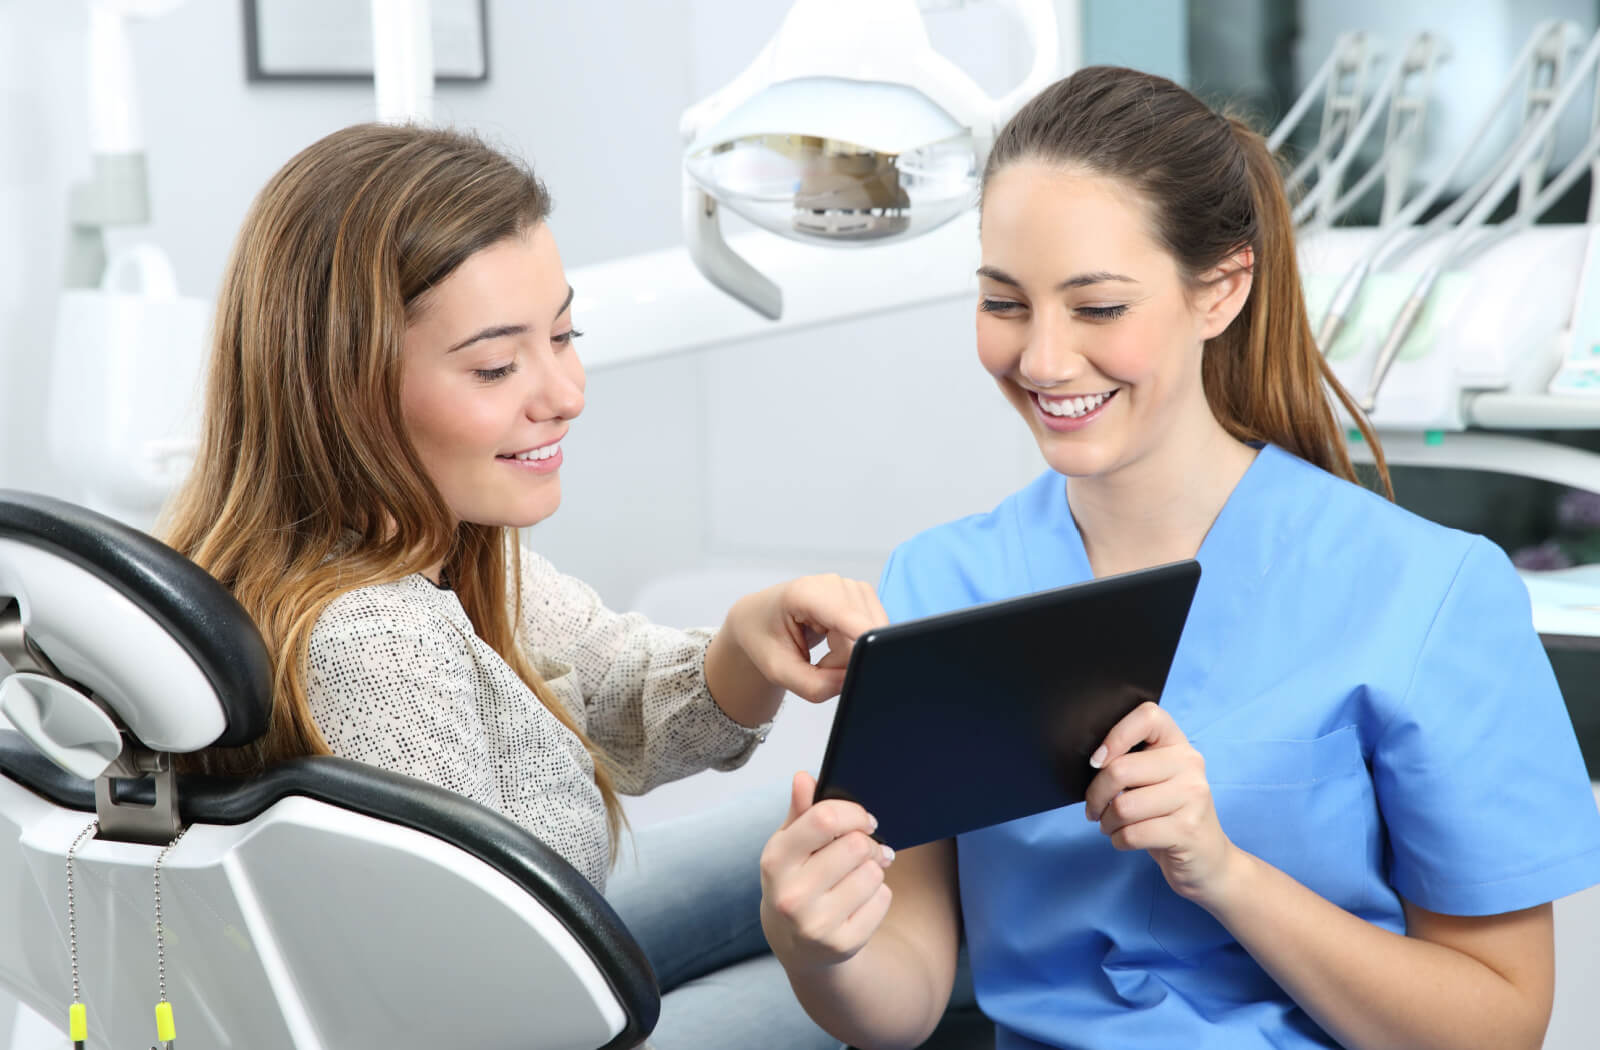 A female dentist in blue scrubs and a woman sitting in a dentist's chair looking at a tablet and discussing Invisalign.